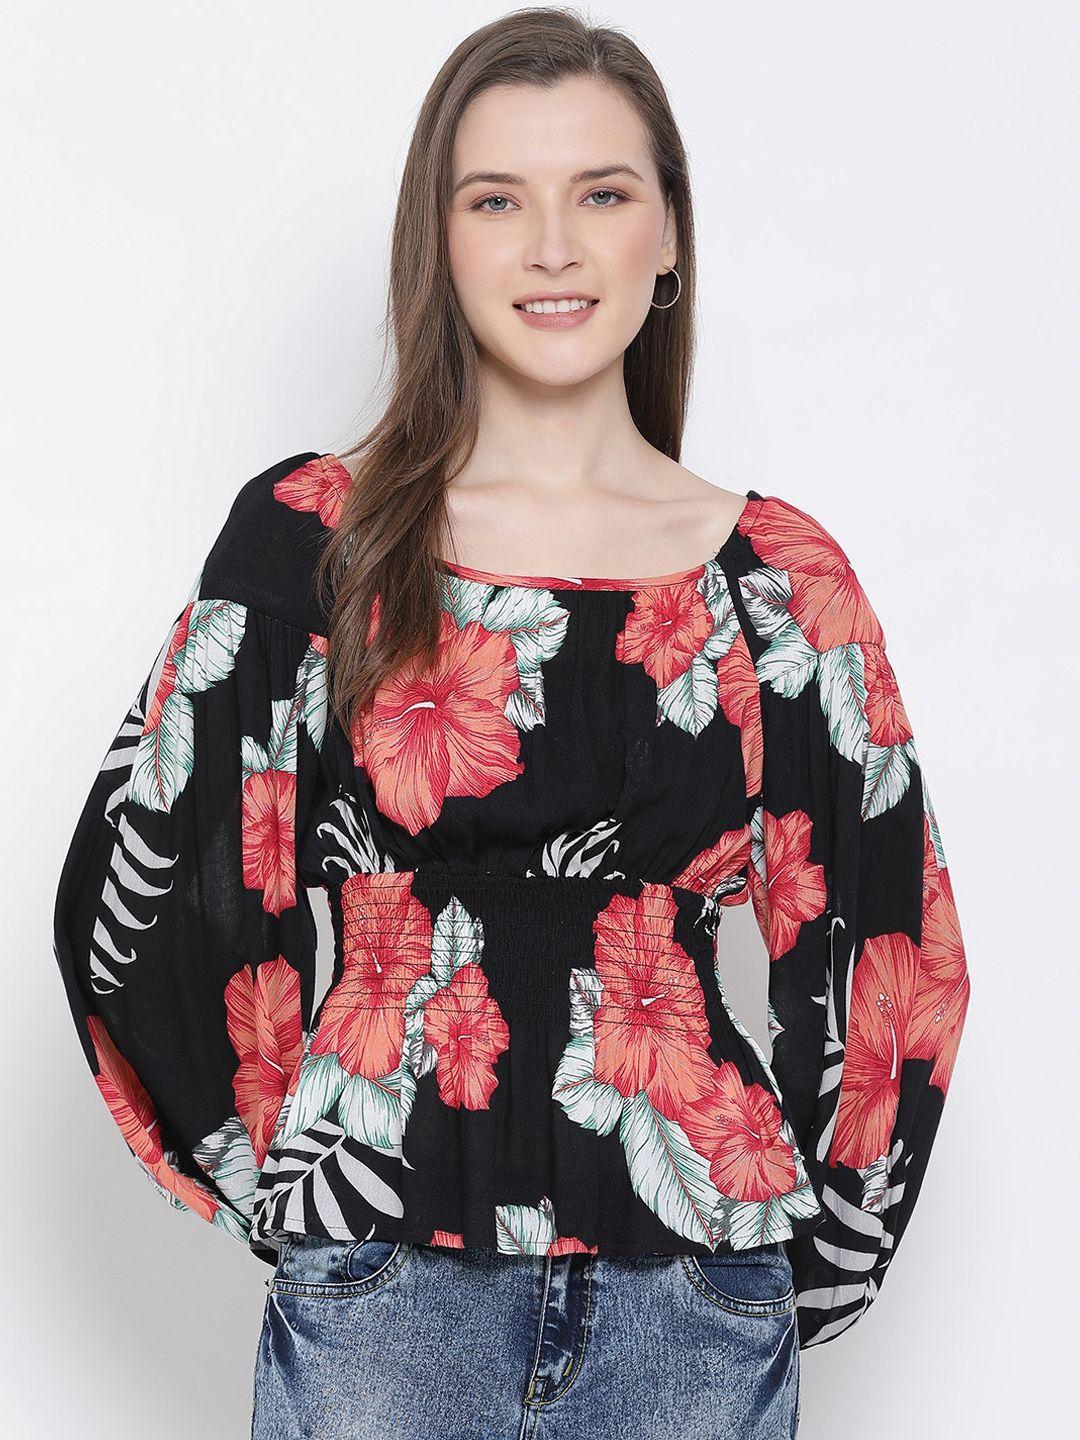 oxolloxo women black floral printed cinched waist top